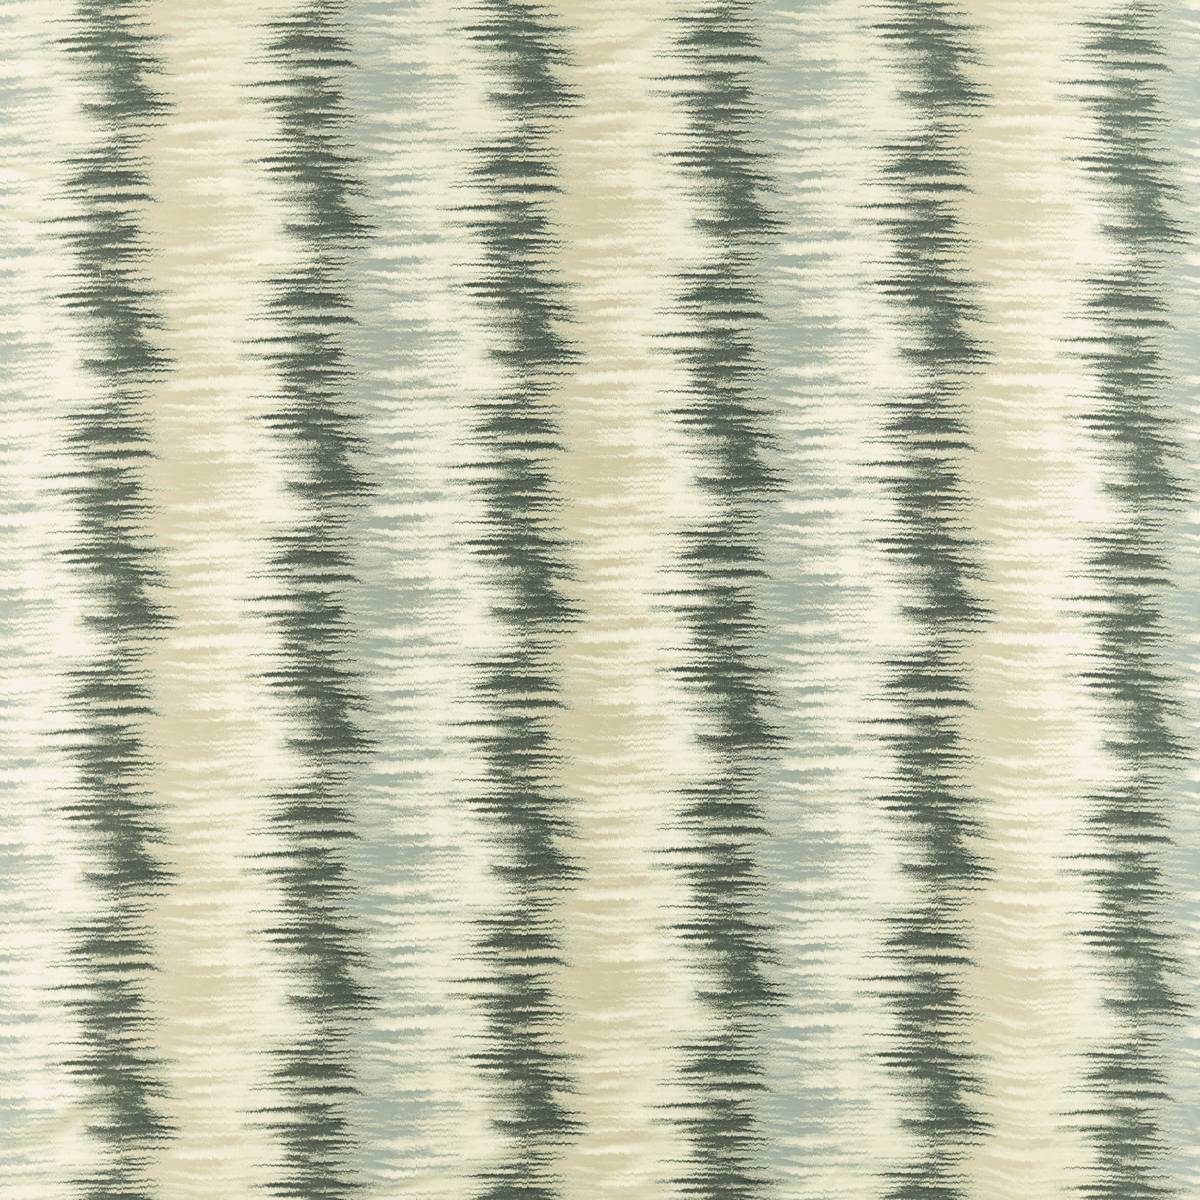 Libeccio Oyster Fabric by Harlequin